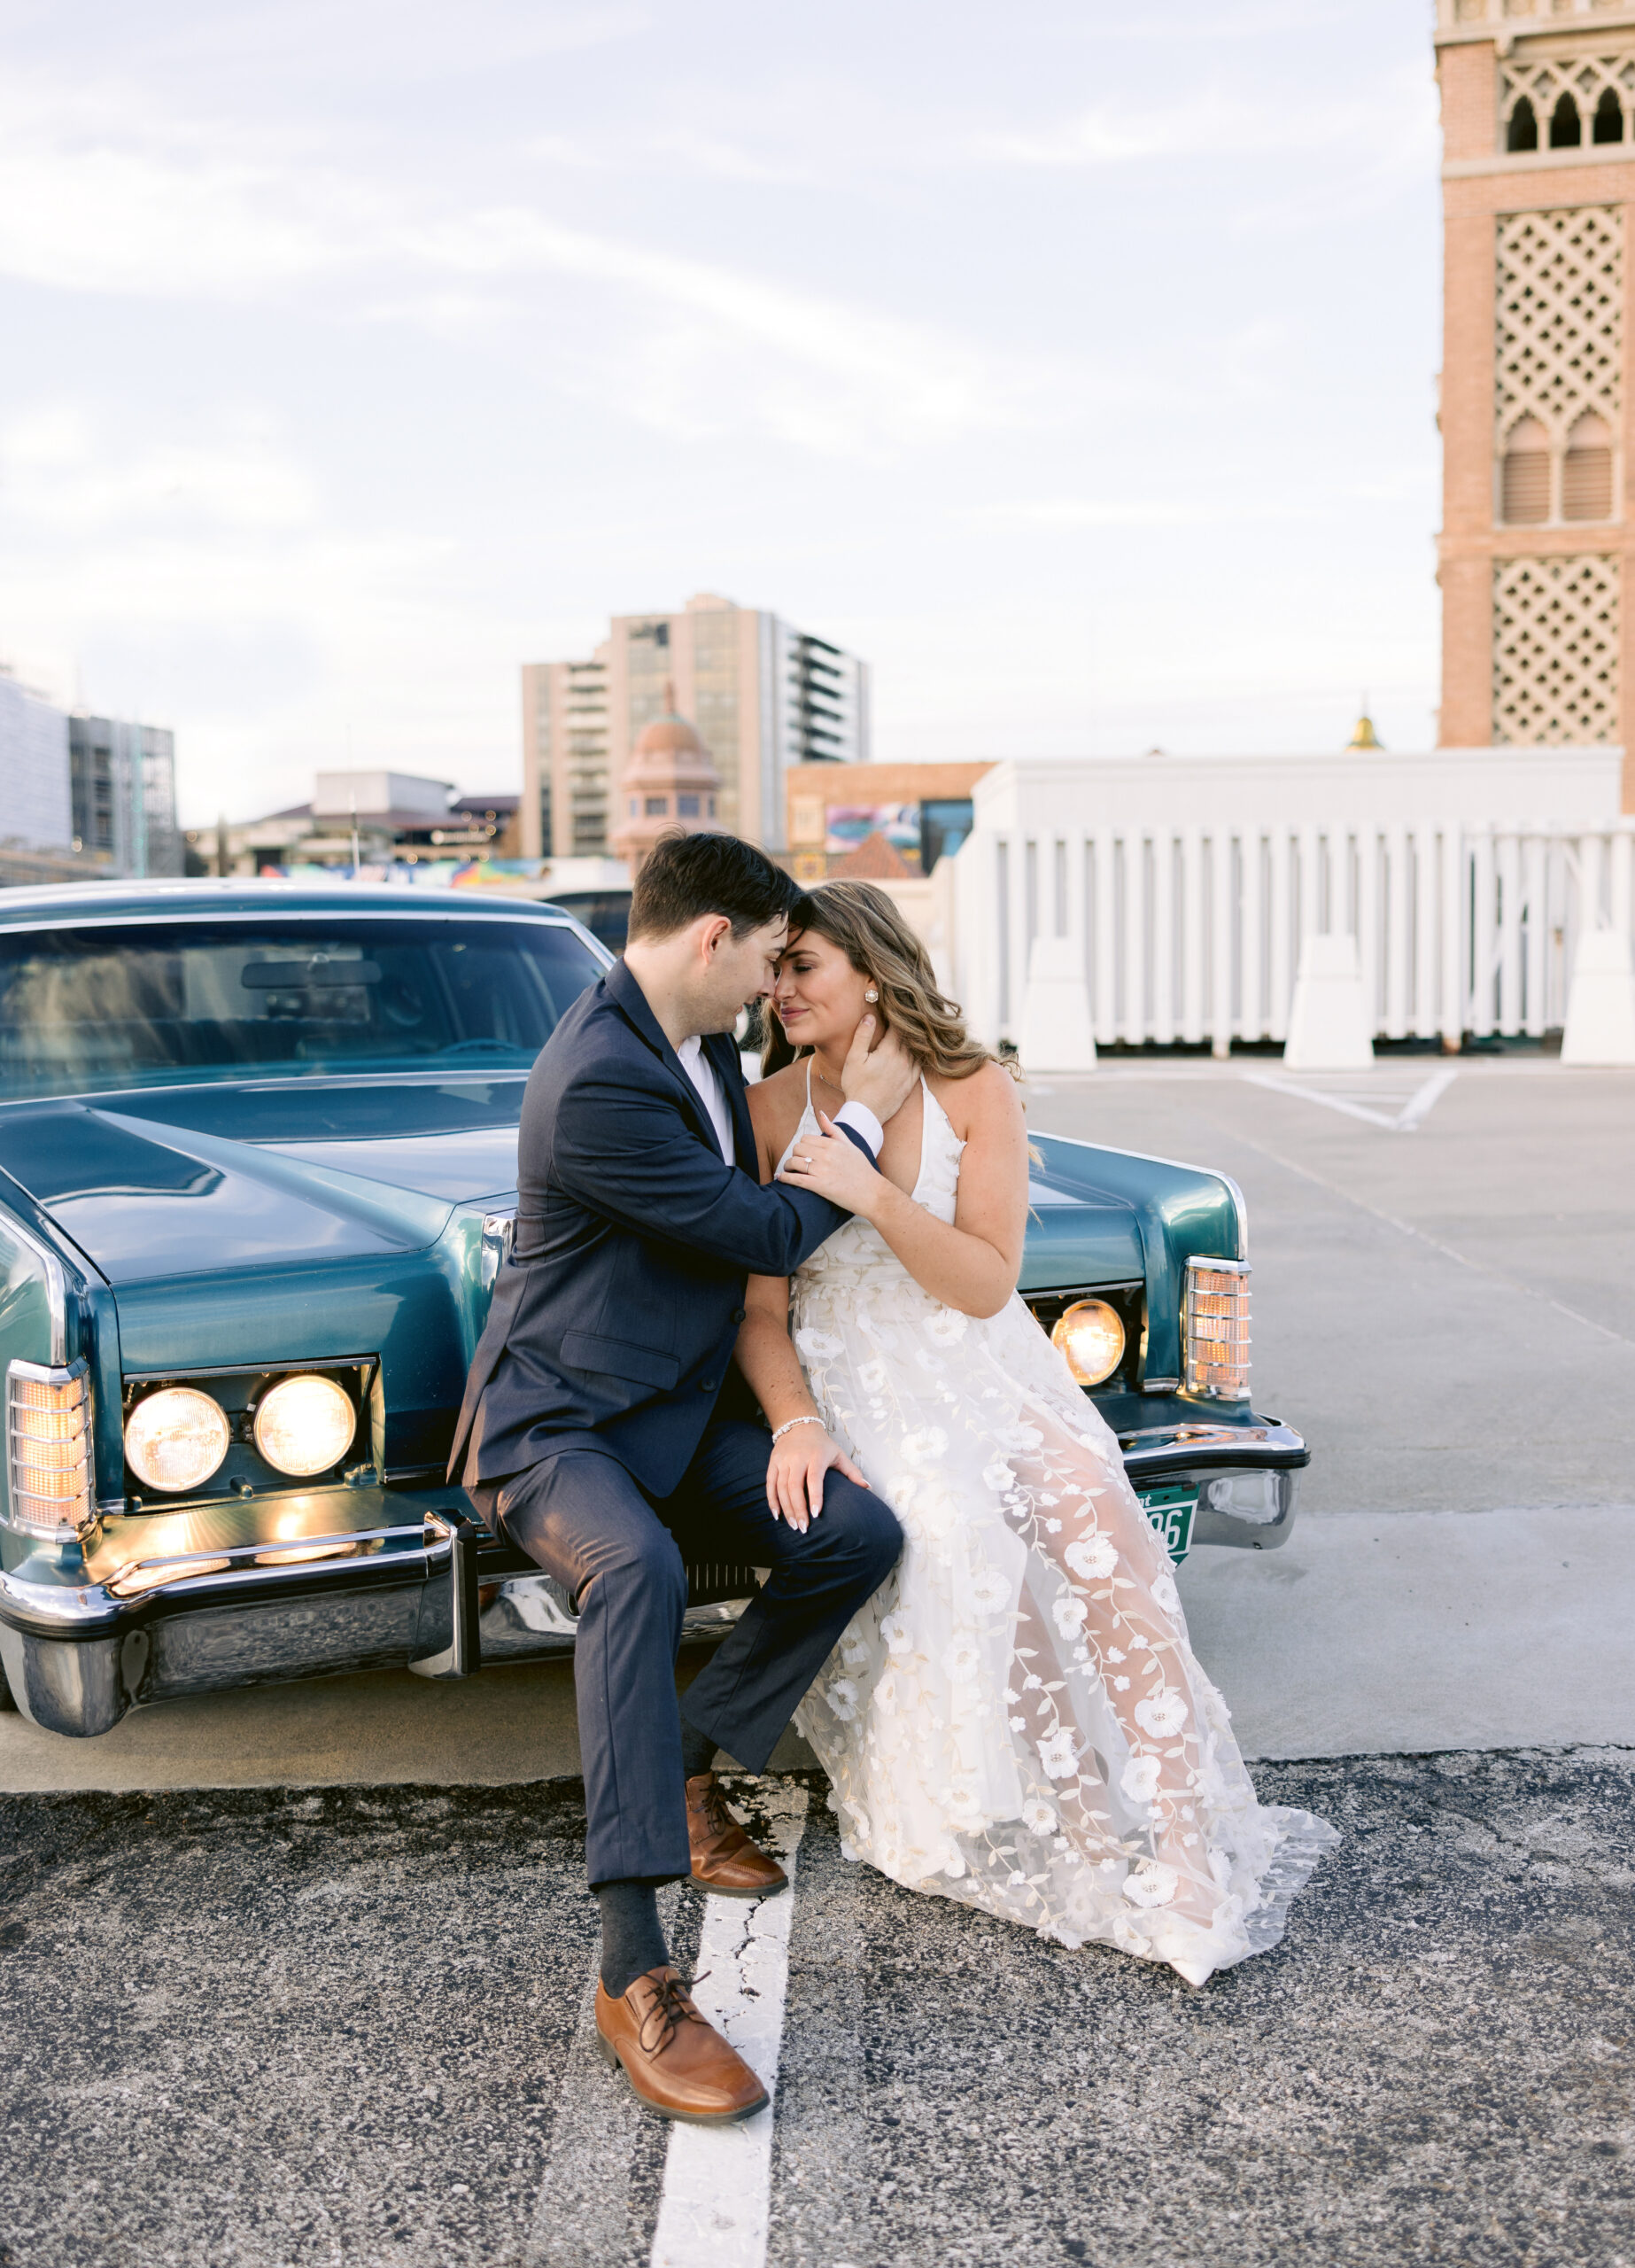 engagement session in Kansas city with a vintage car, elegant couples session by Tatyana Zadorin Photography